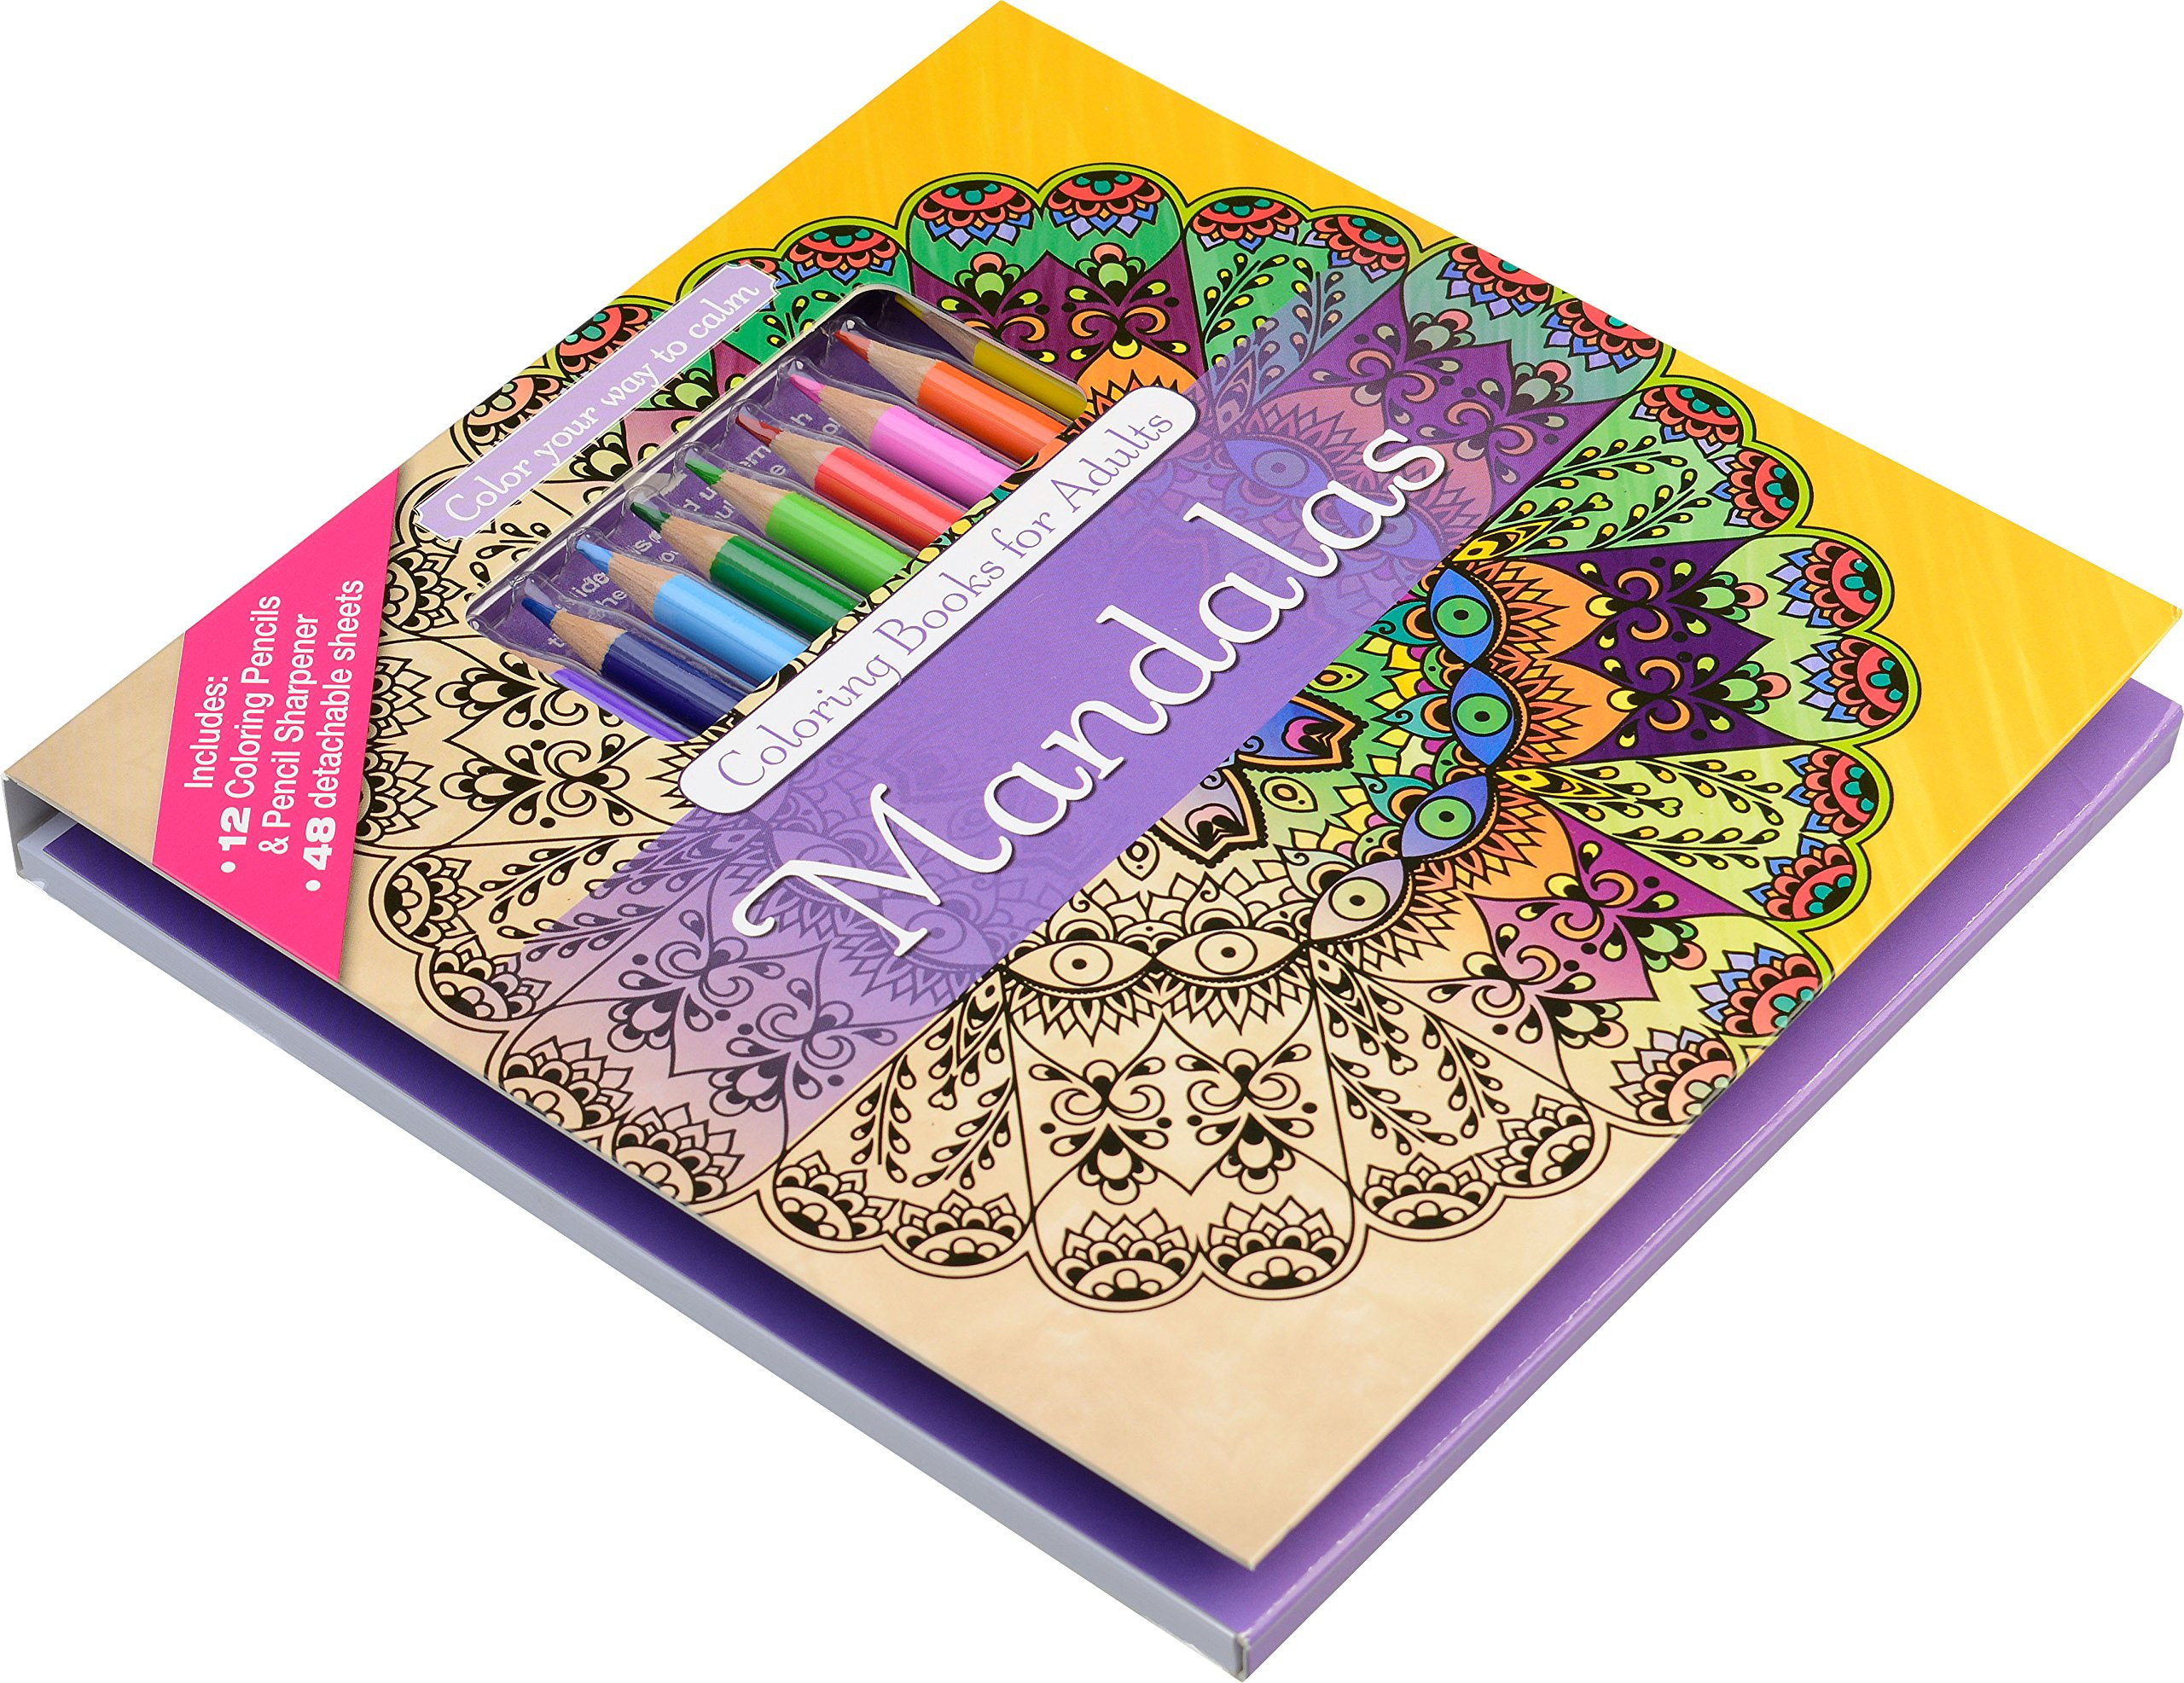 Coloring Pencils For Adult Coloring Books
 Mandalas Adult Coloring Book Set With 24 Colored Pencils